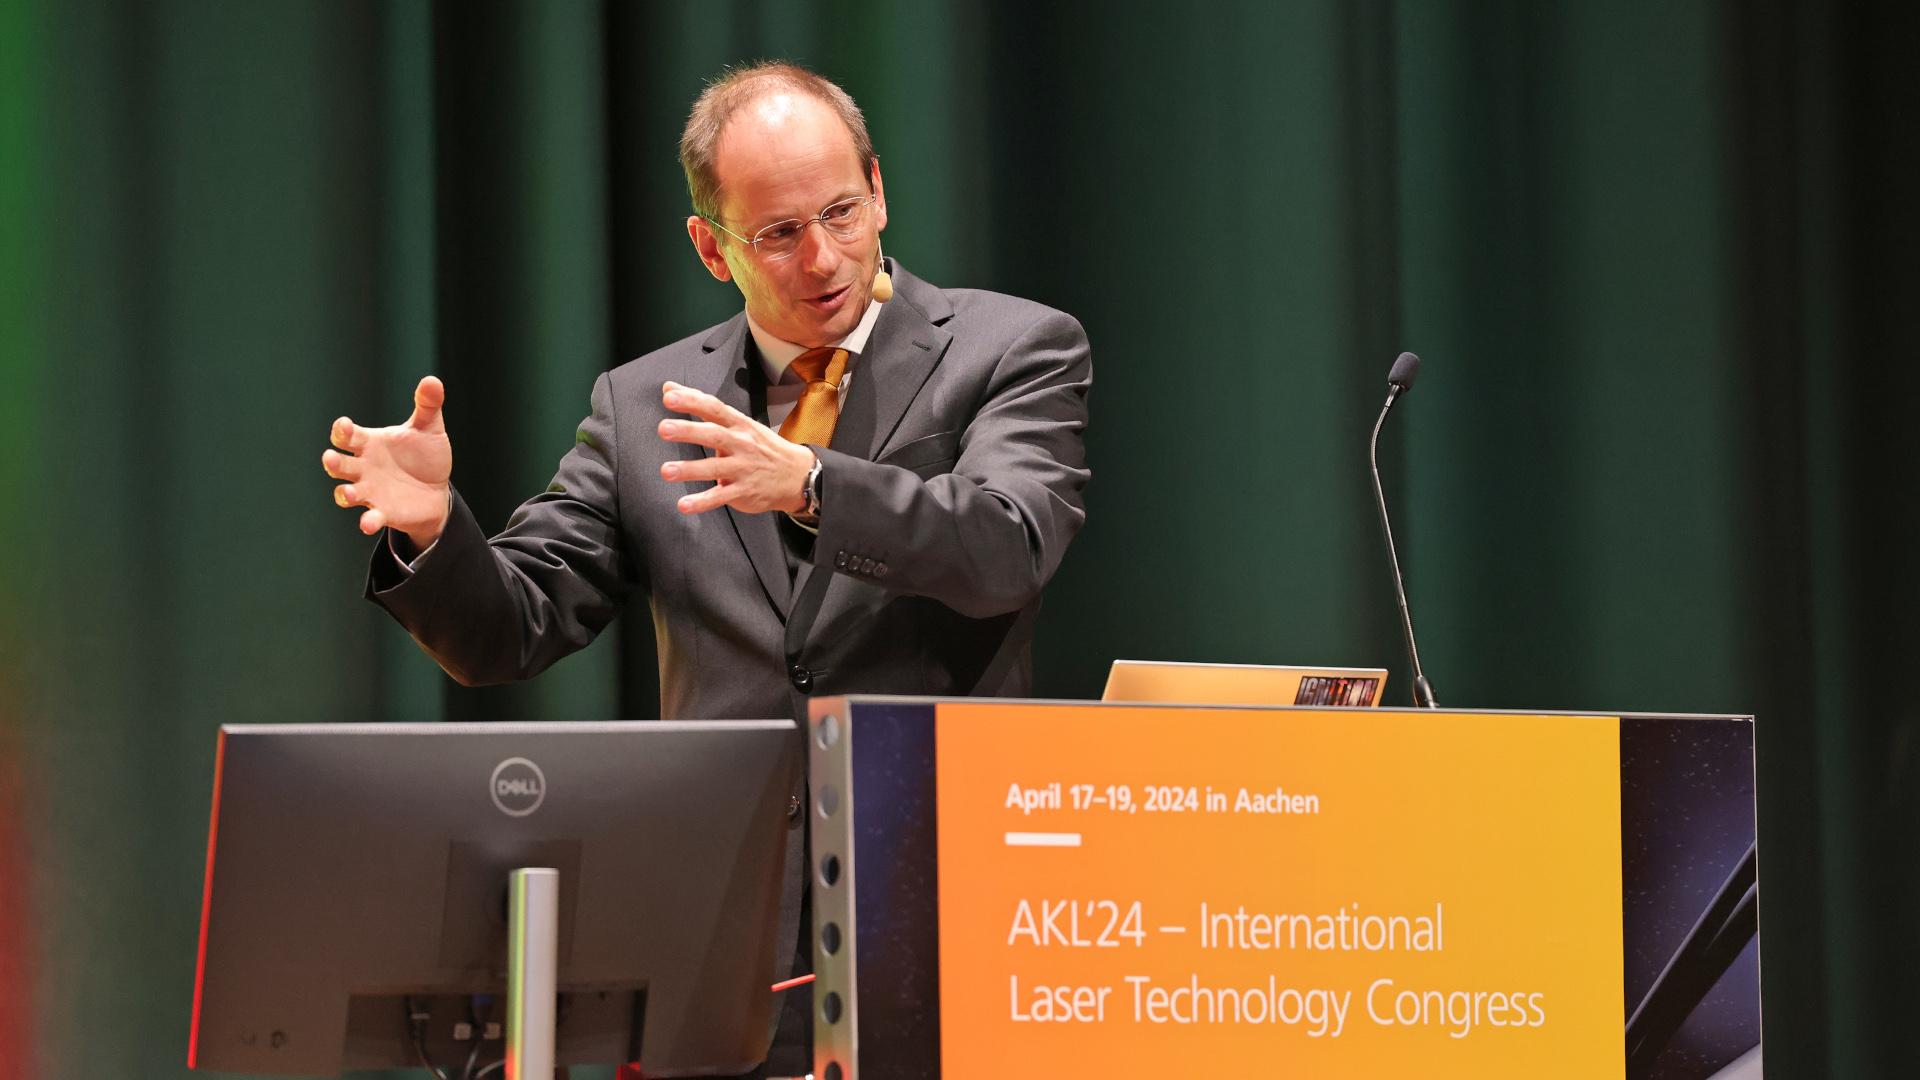 Prof. Constantin Haefner opened the Gerd Herziger Session with his presentation entitled "Effects of digitalization and AI on value creation and business models in laser technology".